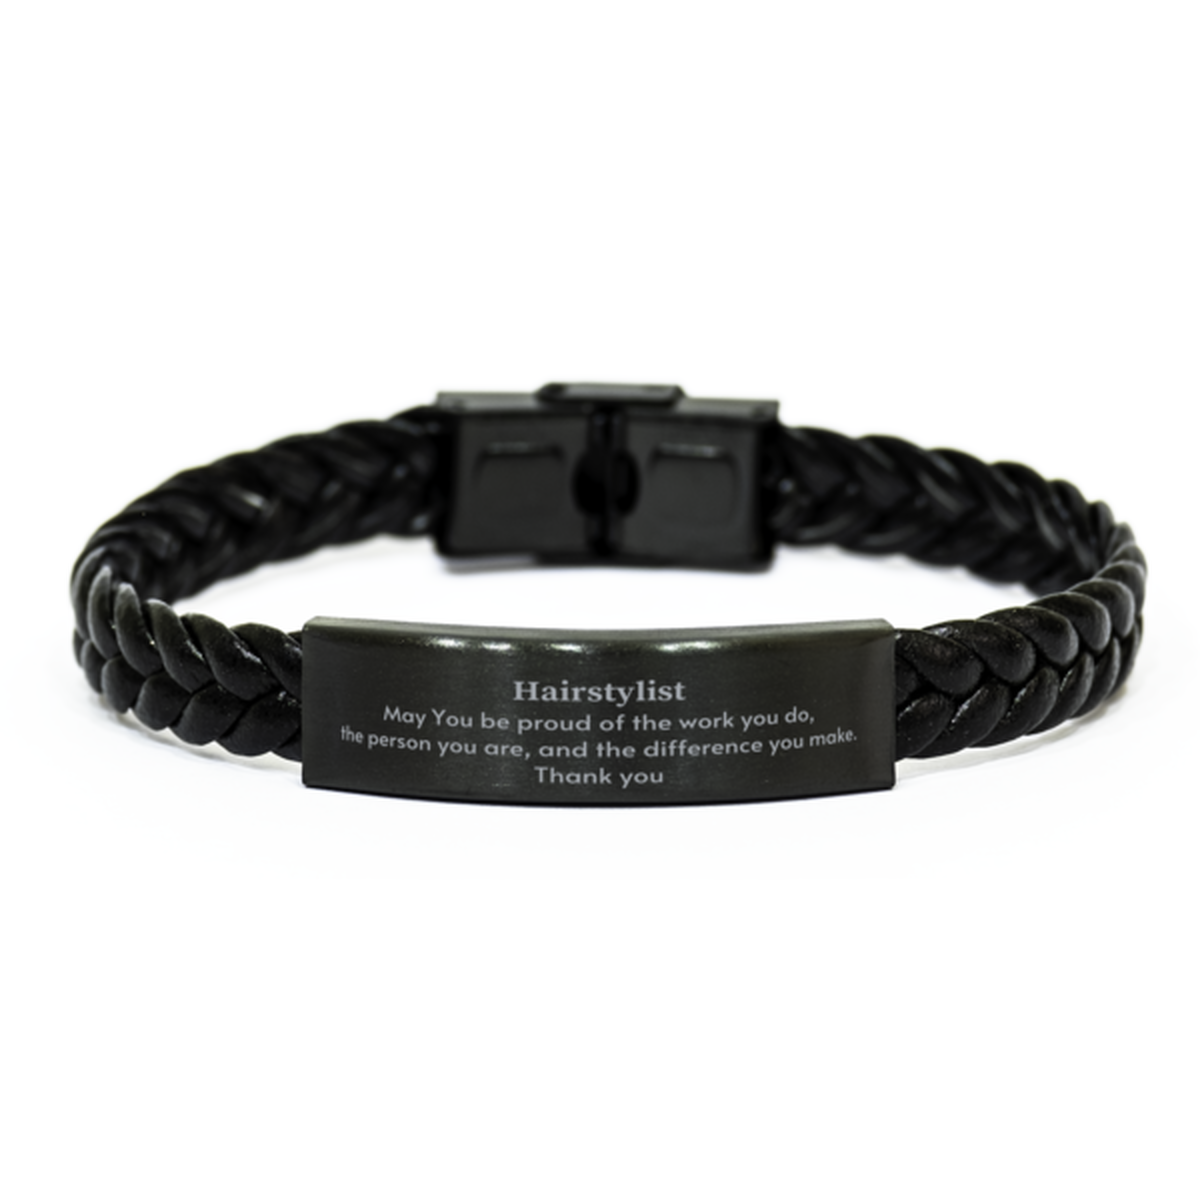 Heartwarming Braided Leather Bracelet Retirement Coworkers Gifts for Hairstylist, Hairstylist May You be proud of the work you do, the person you are Gifts for Boss Men Women Friends